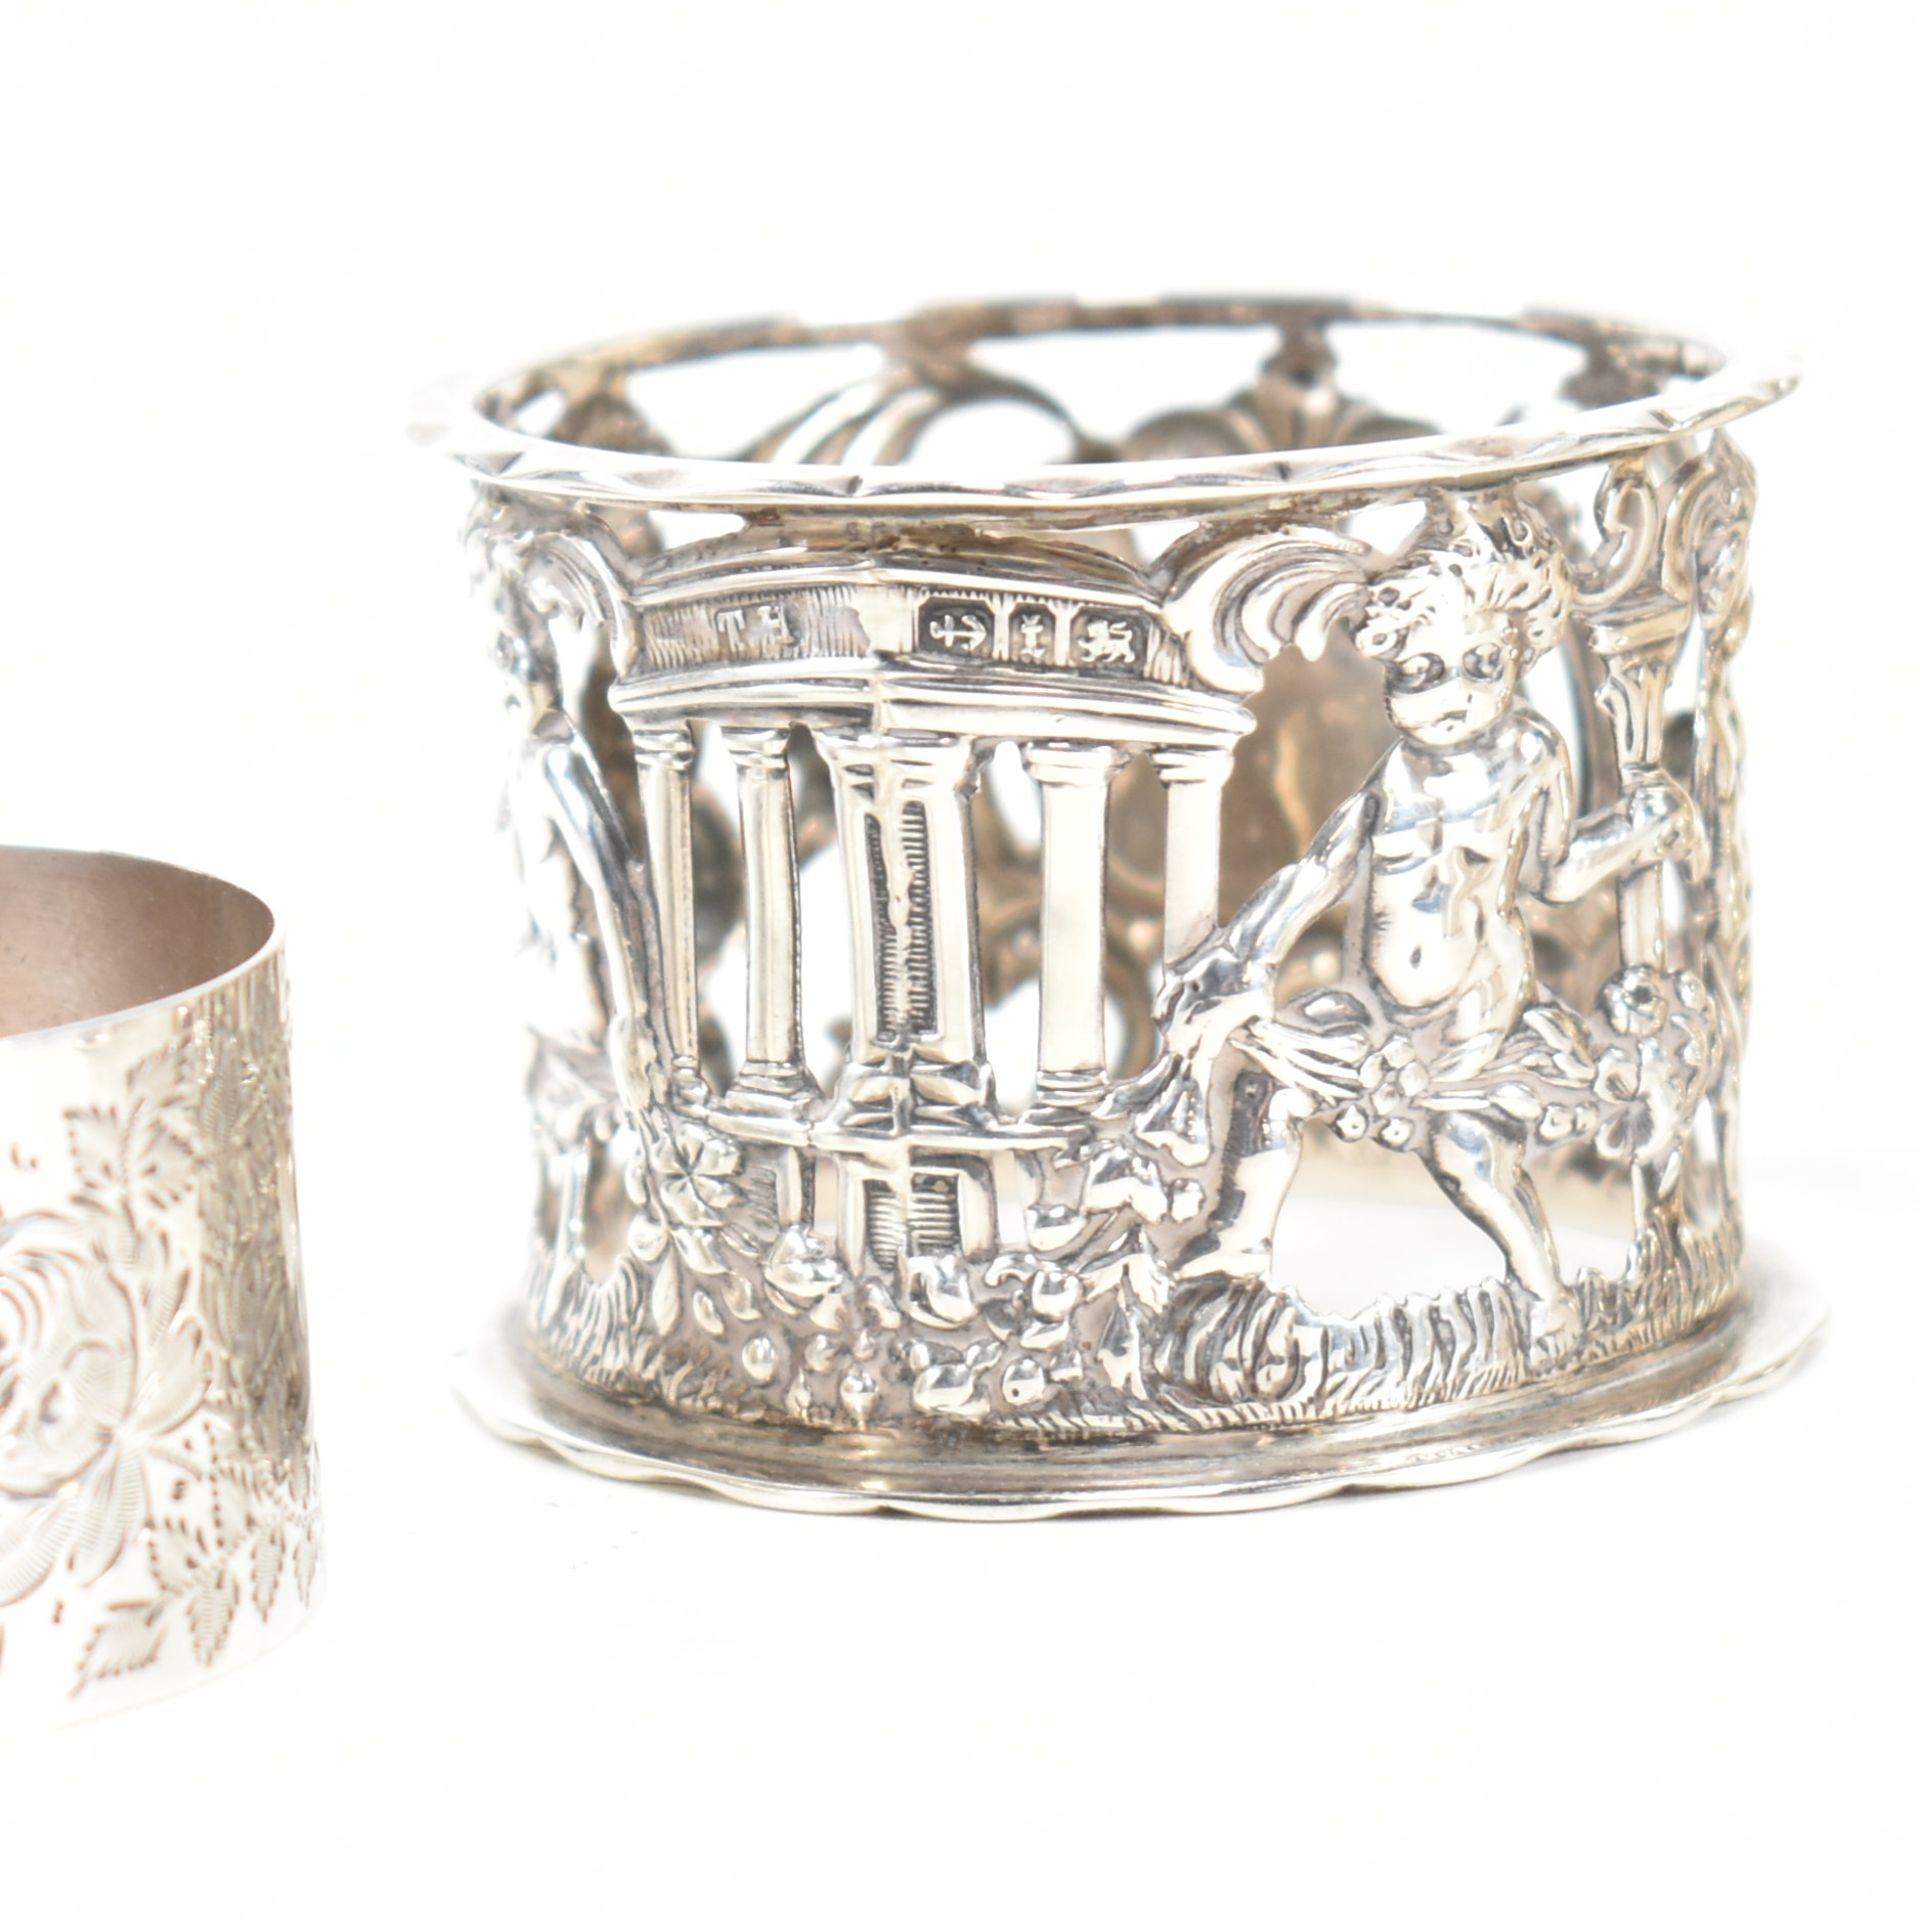 VICTORIAN & LATER HALLMARKED SILVER ITEMS CUP & NAPKIN RINGS - Image 6 of 8